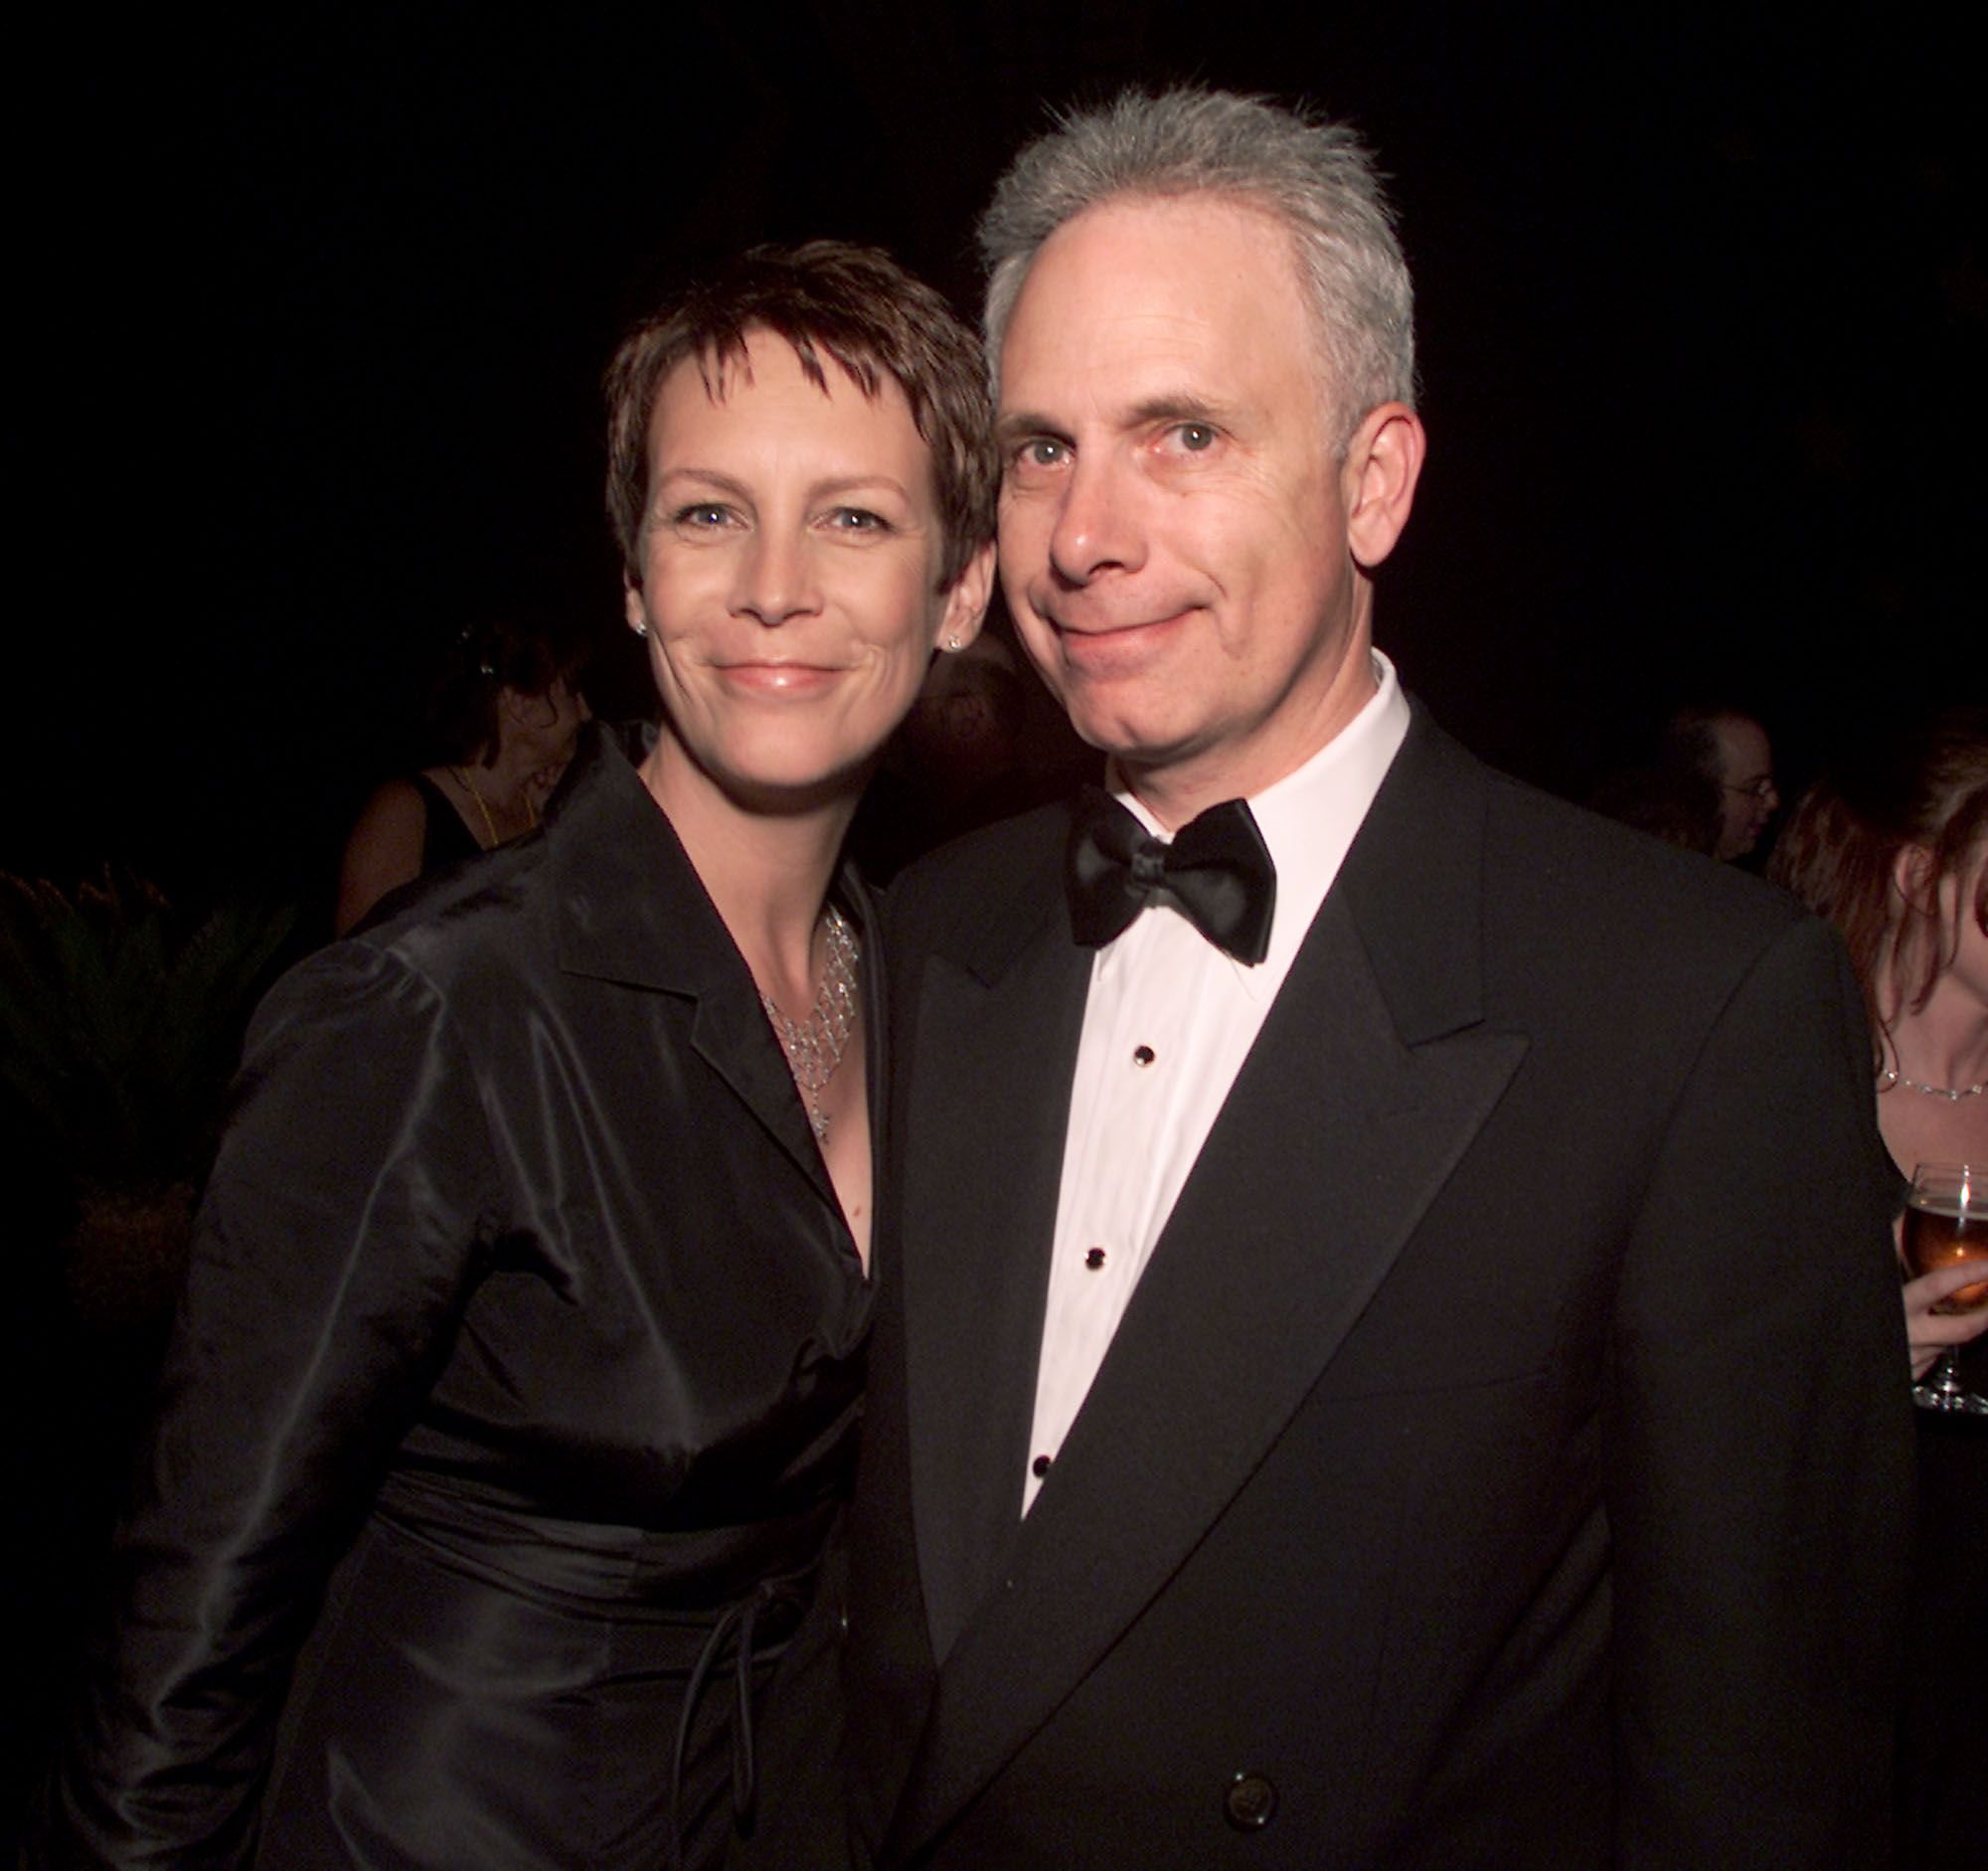 Jamie Lee Curtis with husband Christopher Guest at Comedy Central's post-party after the 15th Annual American Comedy Awards in  Los Angeles, California | Photo: Kevin Winter/Getty Images